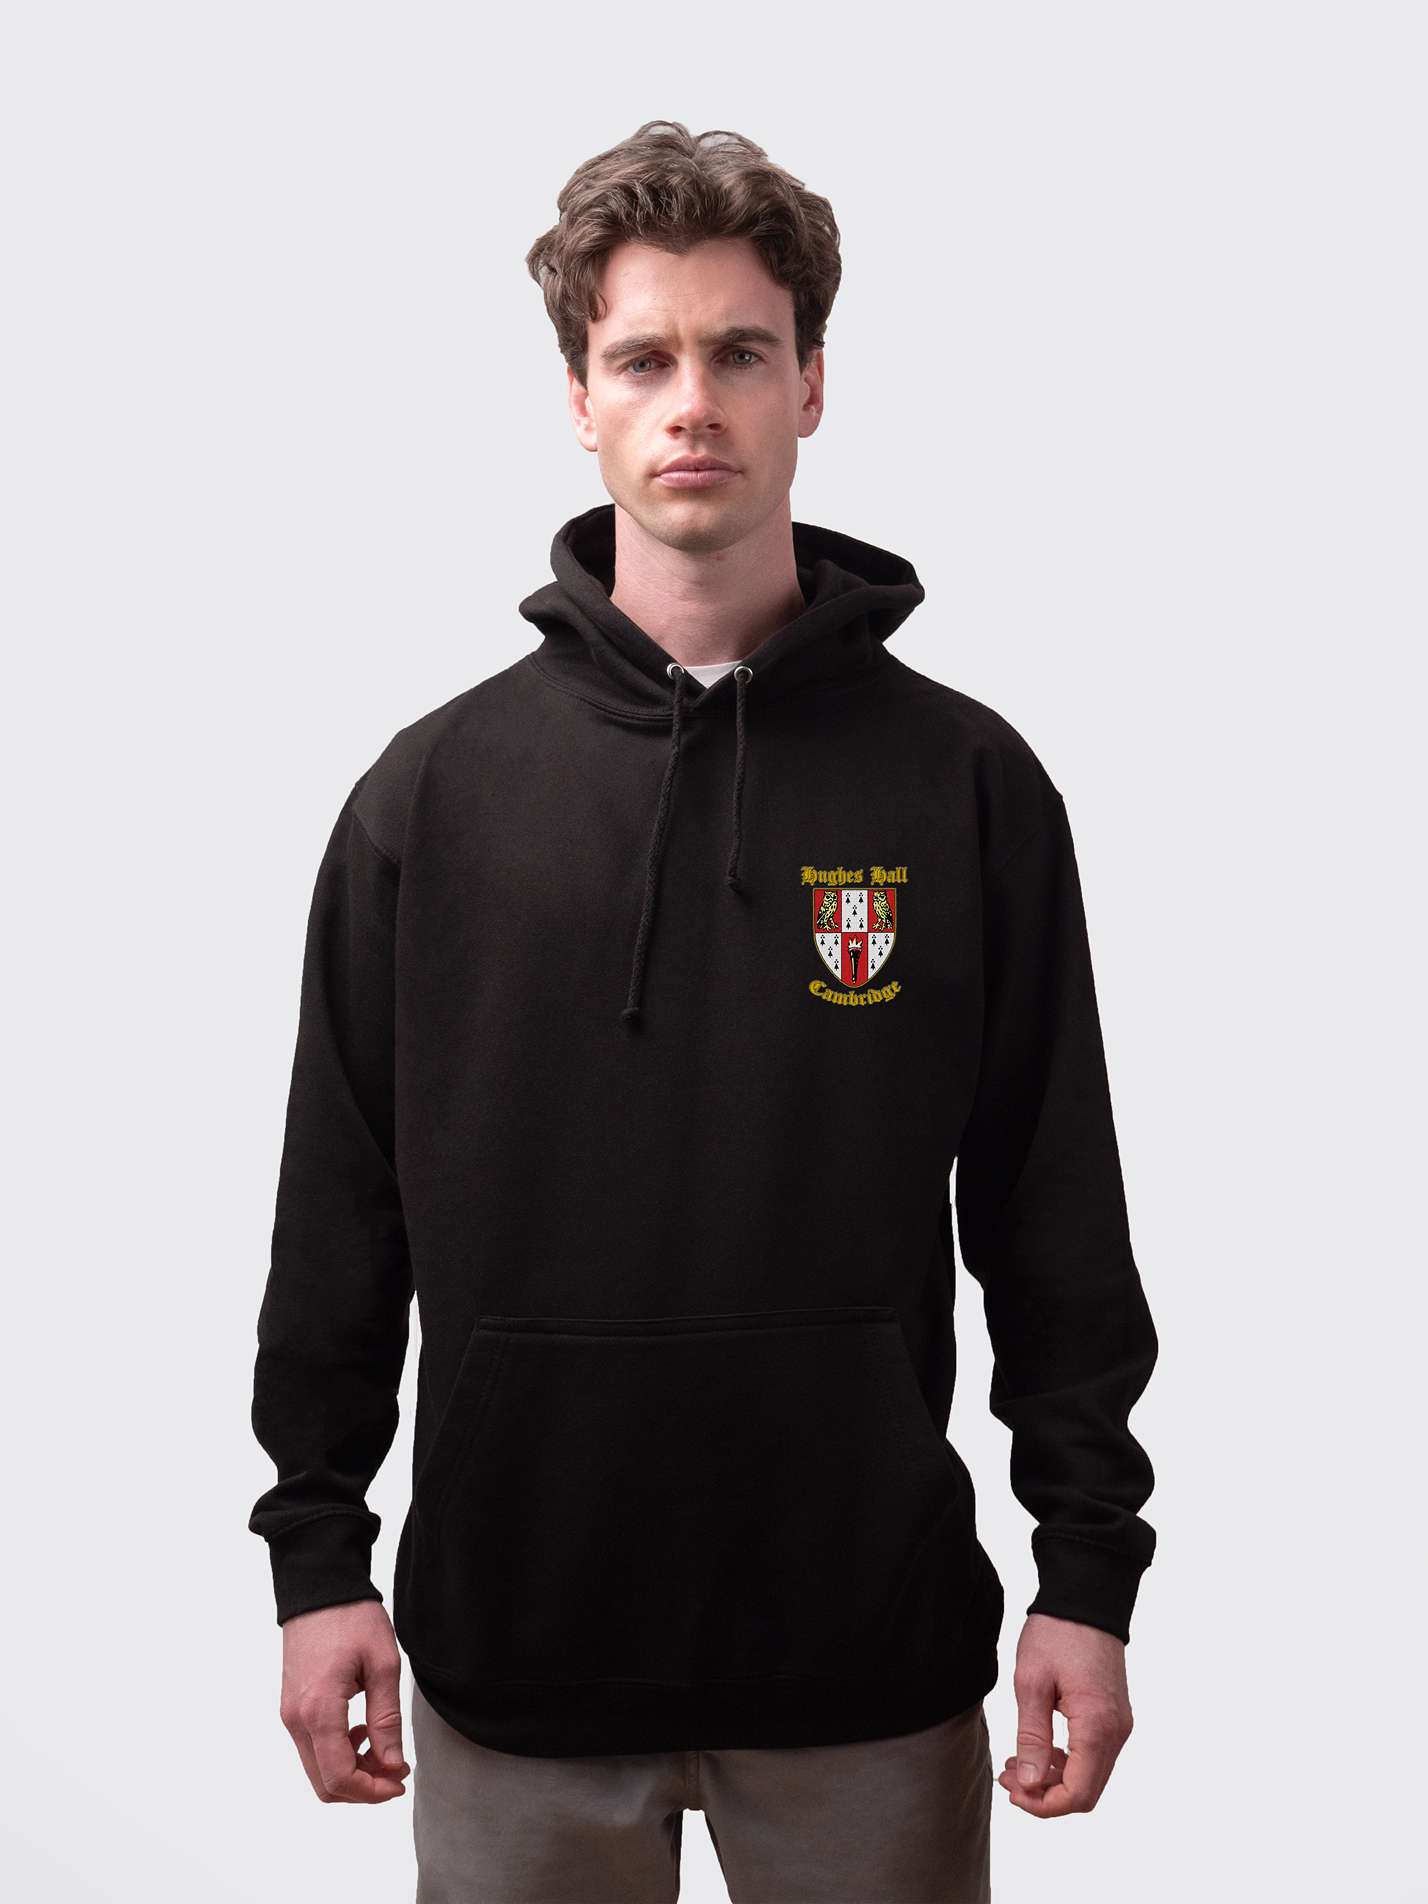 Cambridge uni embroidered hoodie, with name or initials personalisation